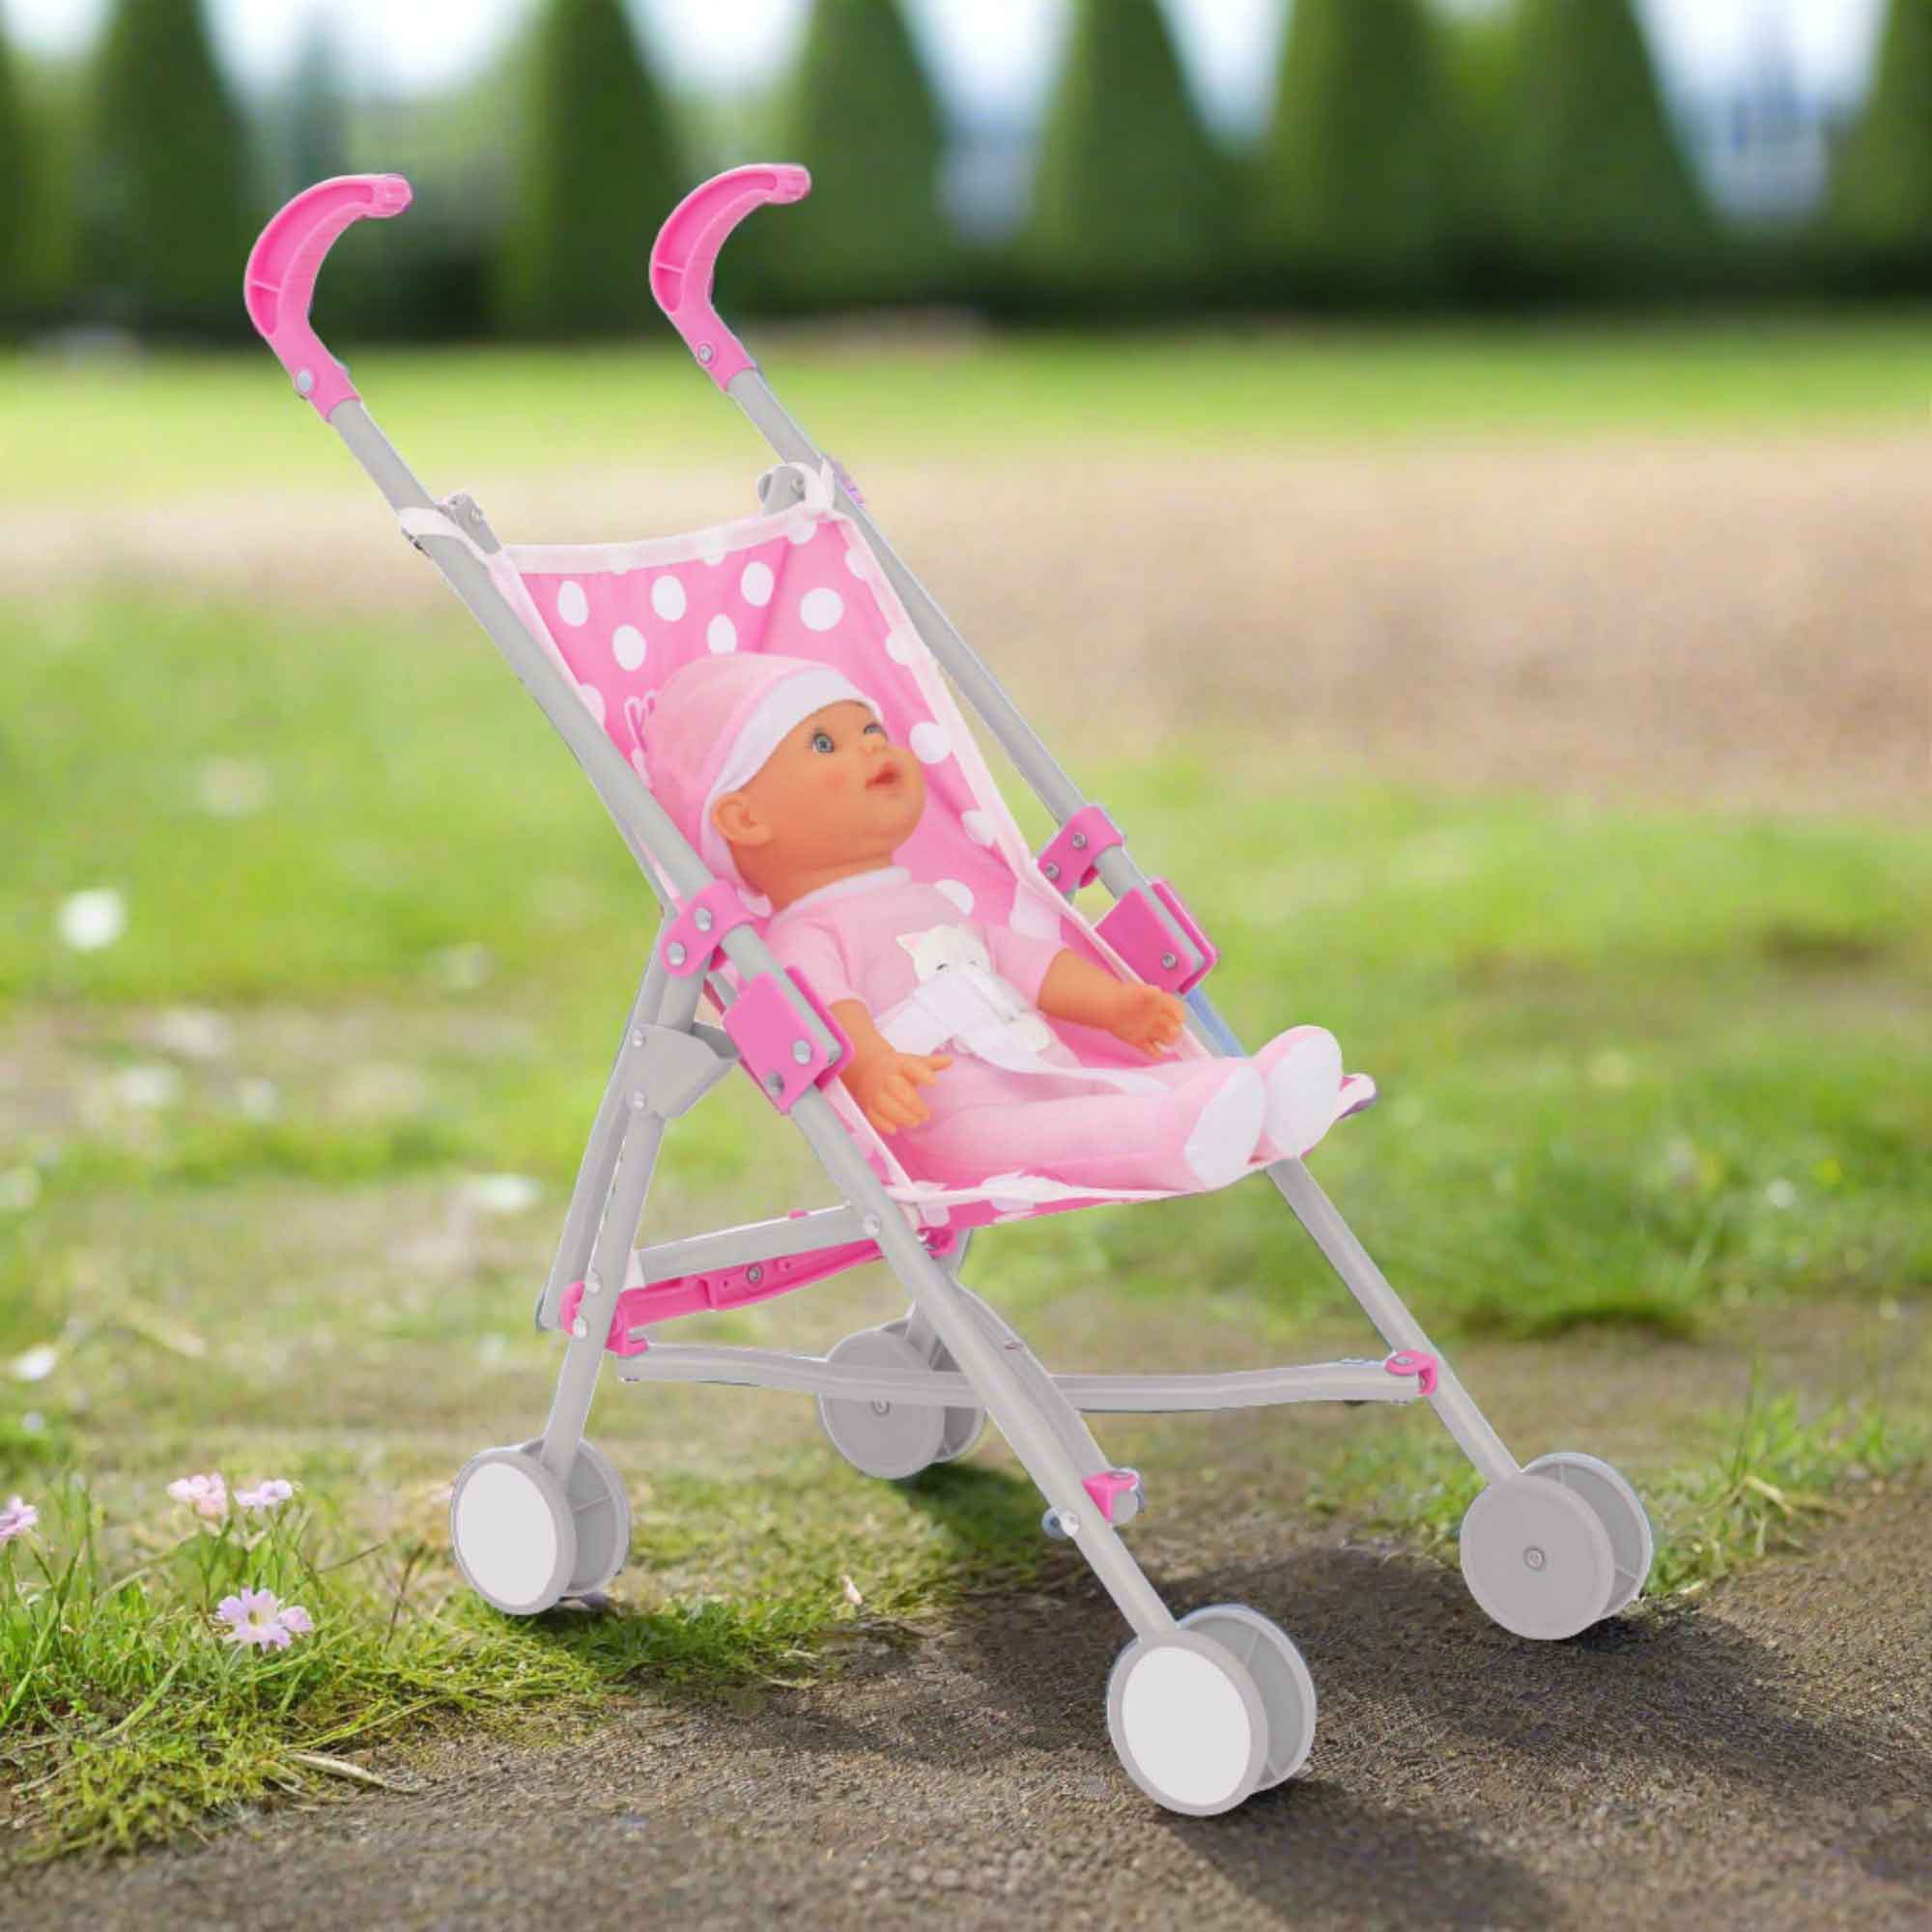 Dolly Tots Dolls Stroller - Includes Doll